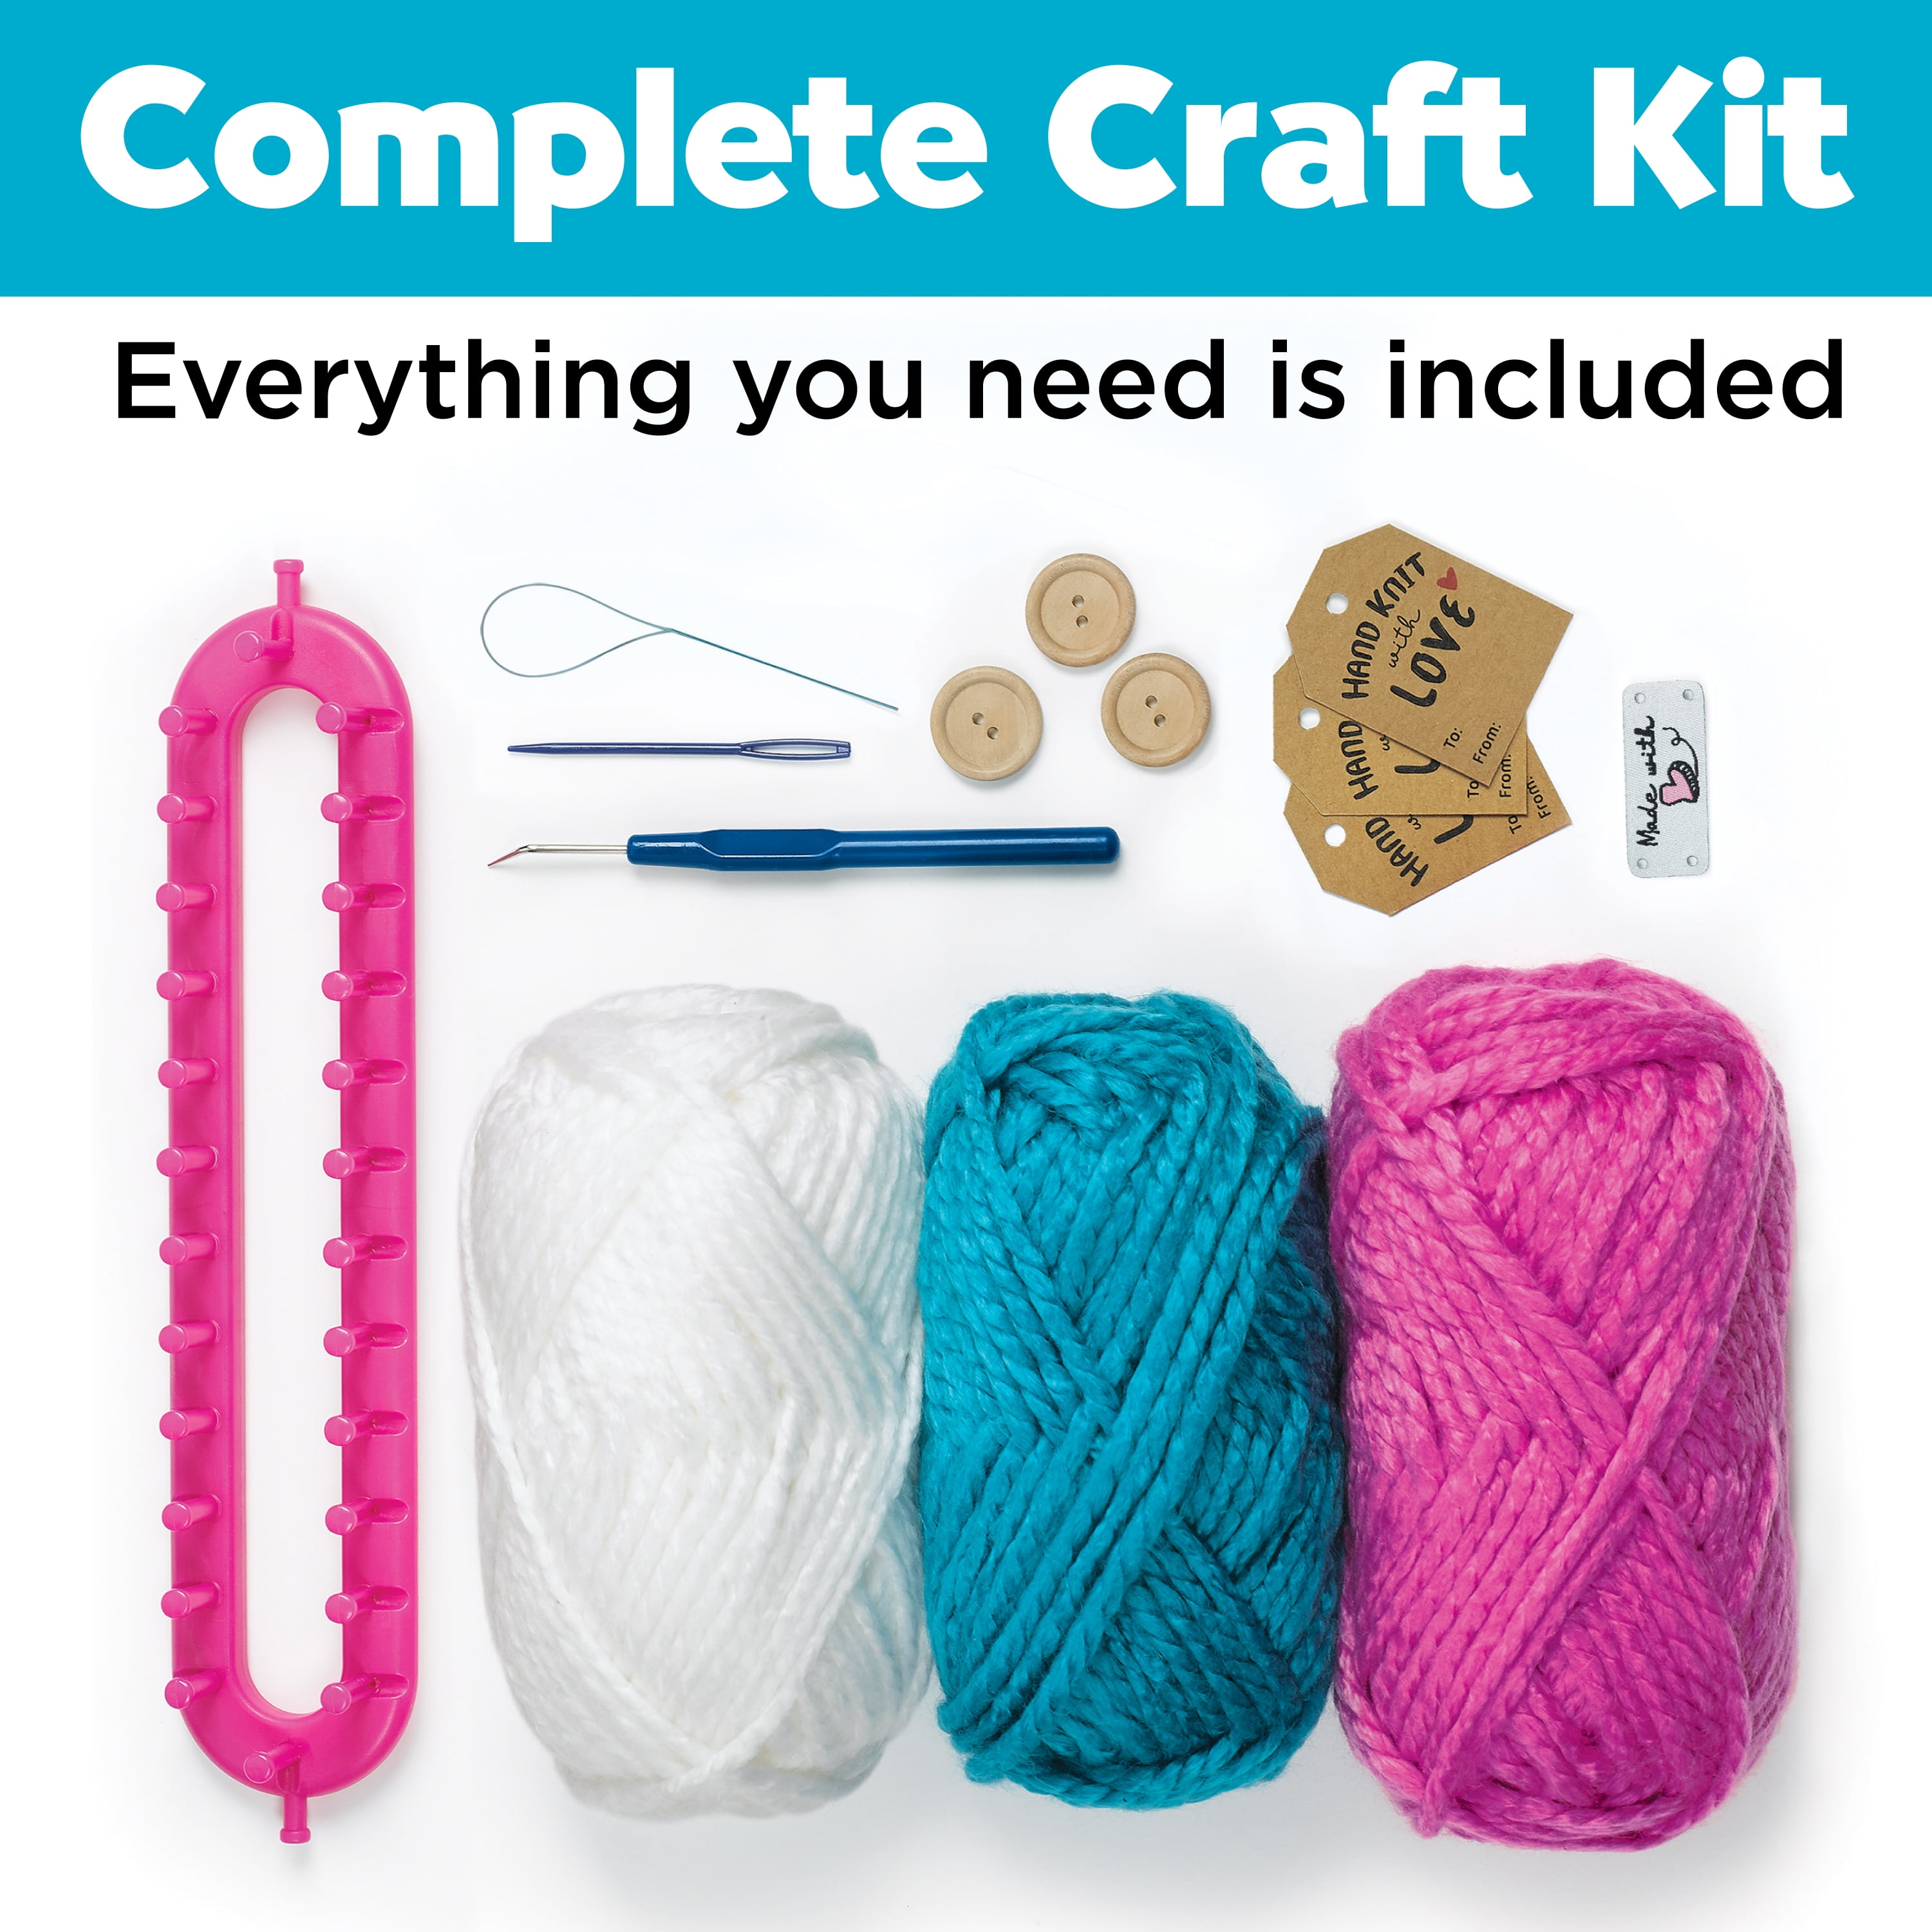 For a Hand-Knit Hat in No Time, We Have the Best Quick-Knit Kits –